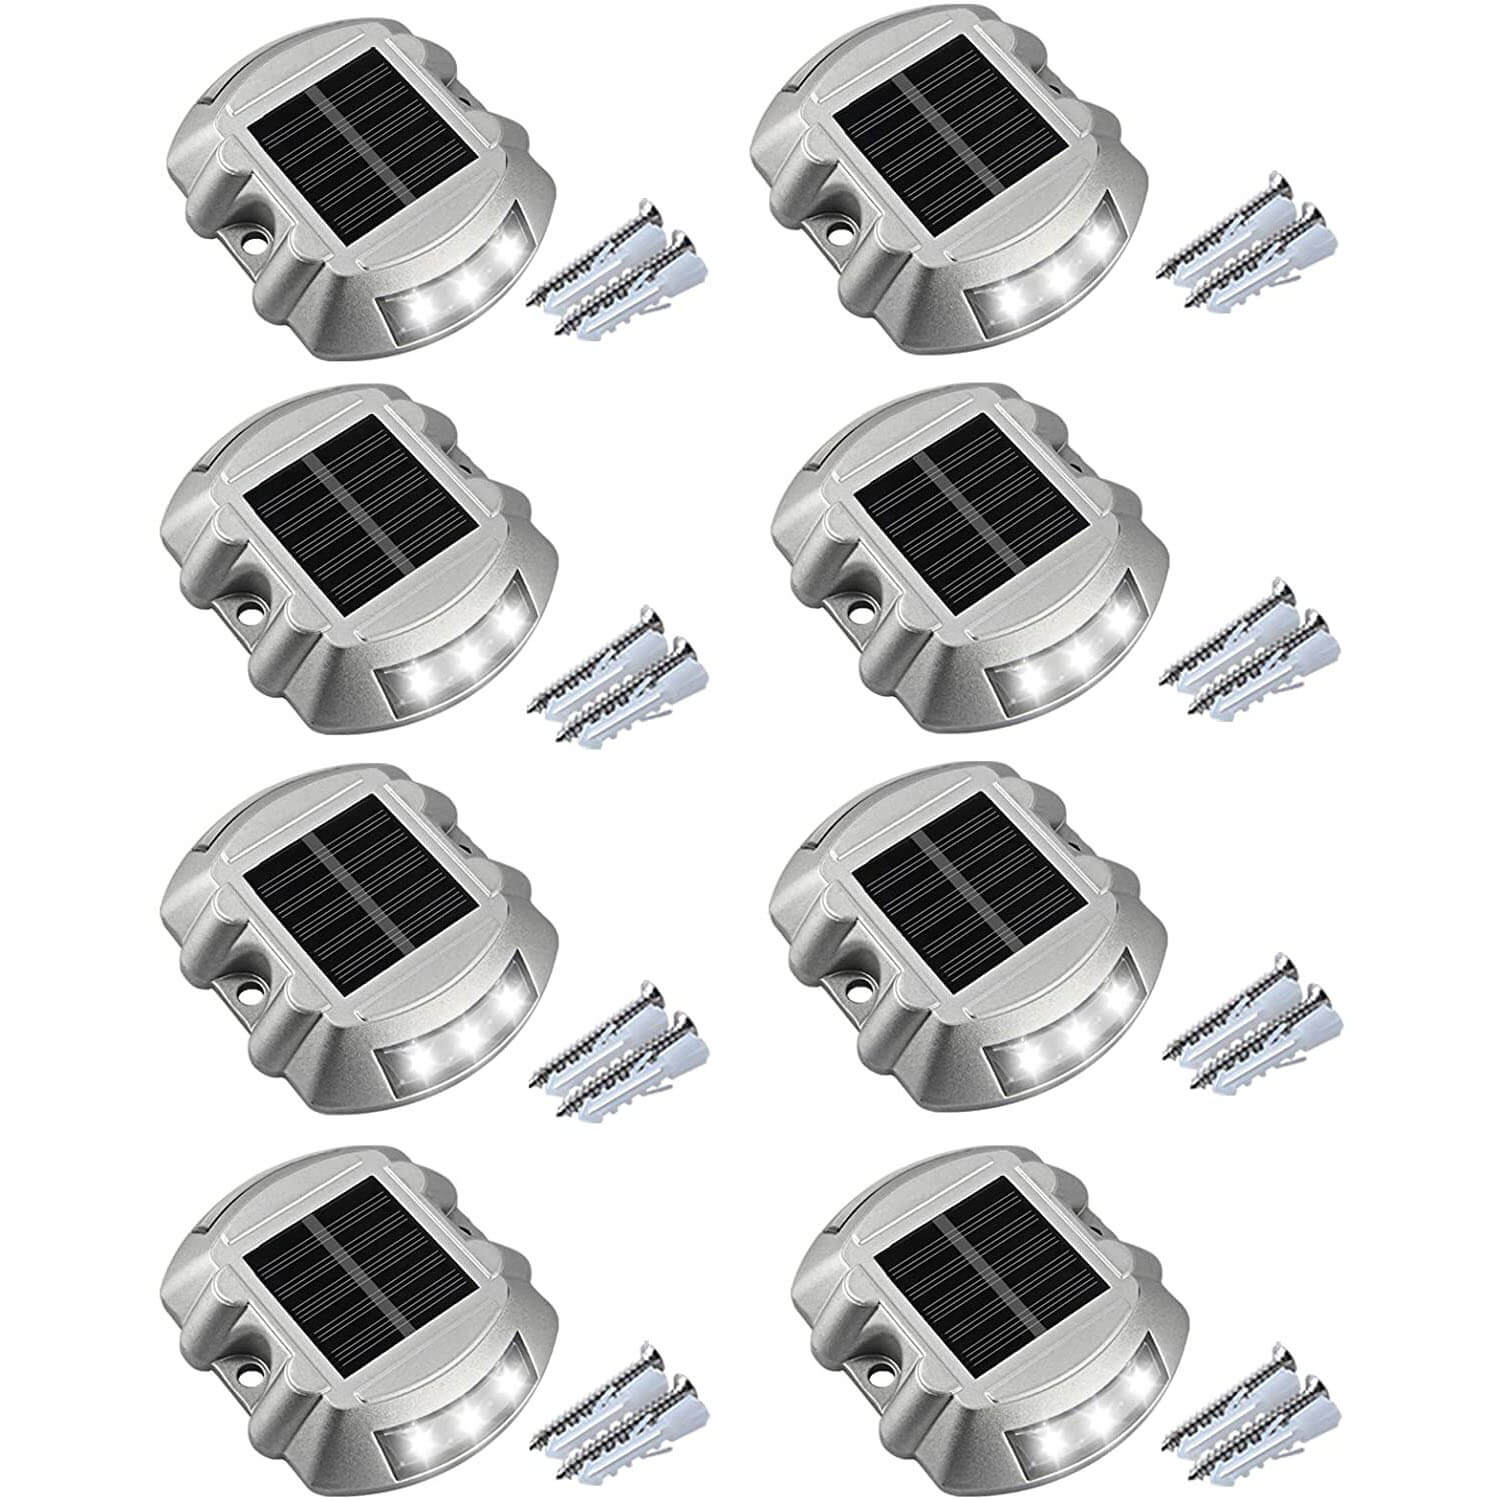 APONUO Solar Driveway Lights (8 Pack)